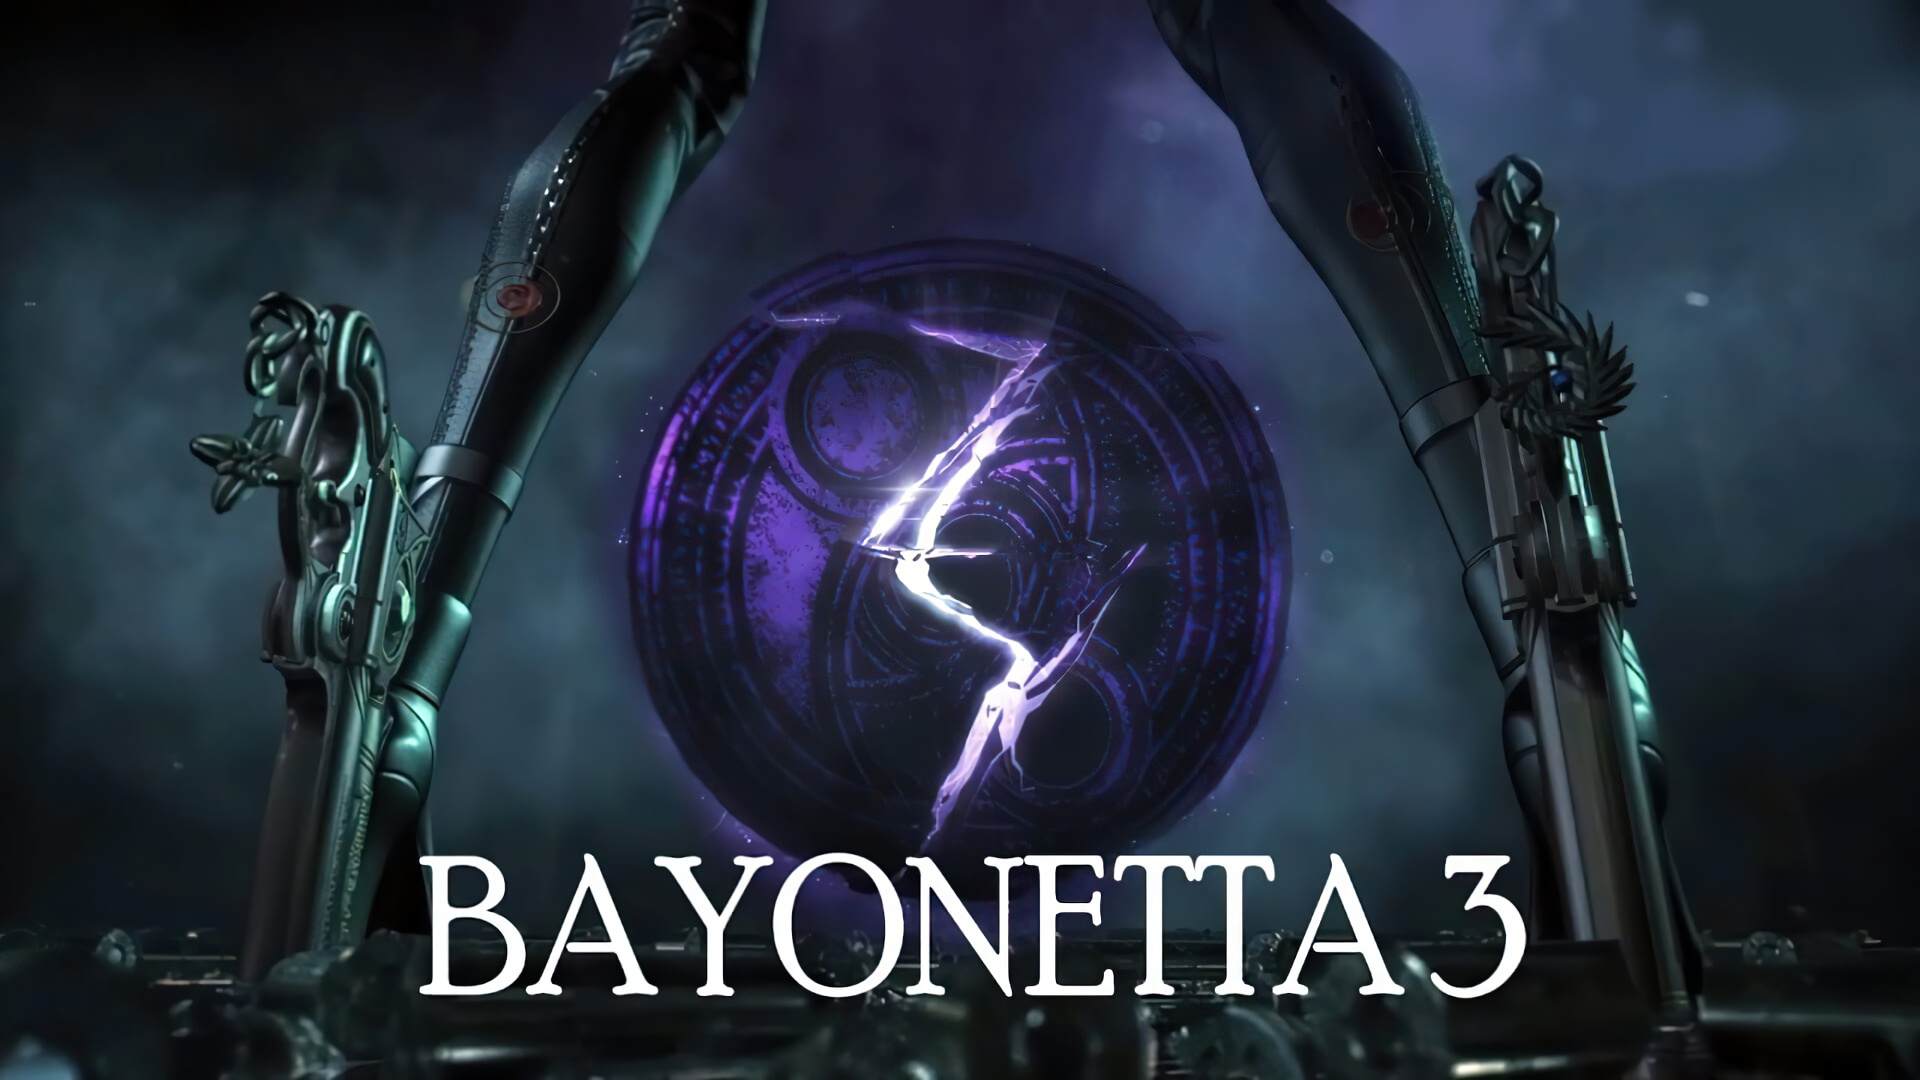 Bayonetta 3: The third entry in the series, In development by PlatinumGames. 1920x1080 Full HD Wallpaper.